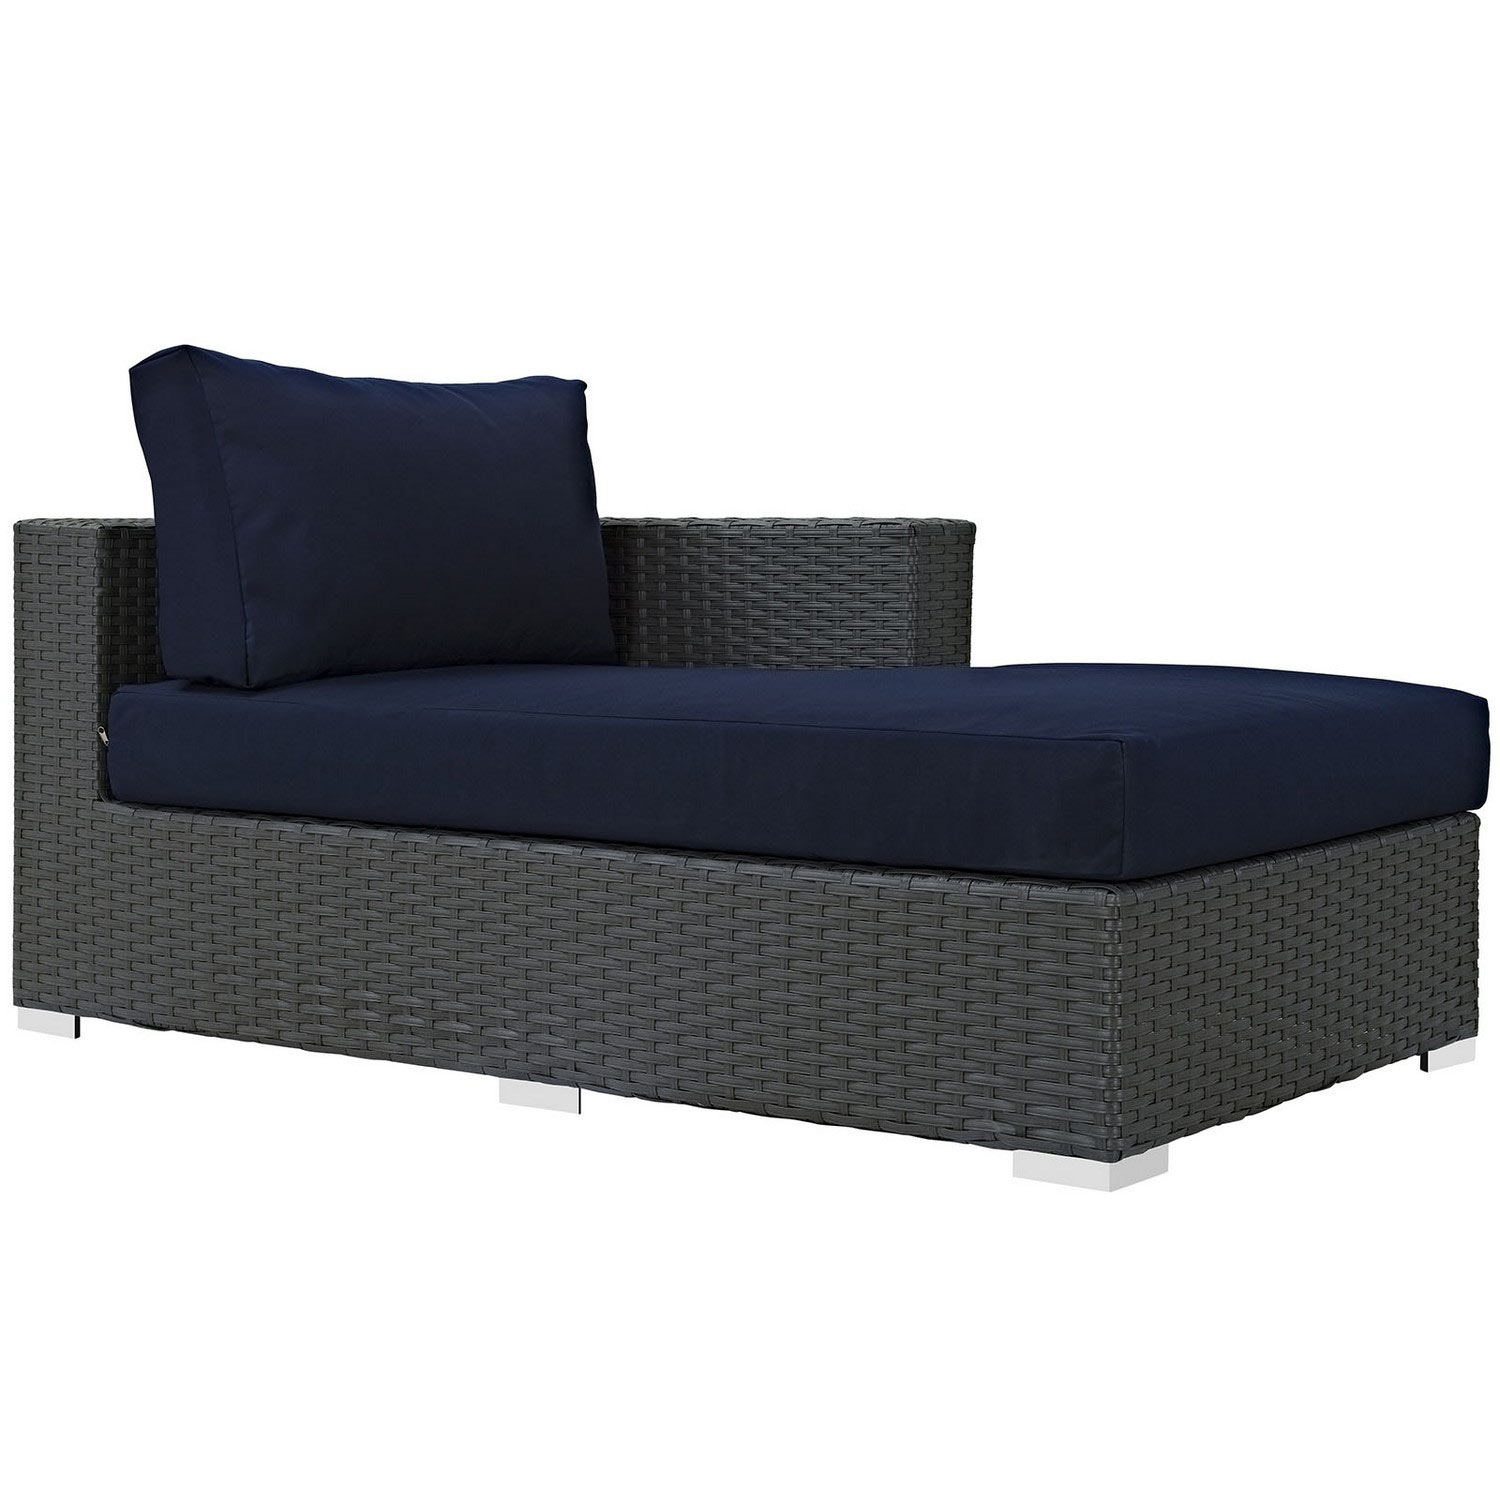 Modway Sojourn Outdoor Patio Fabric Sunbrella Right Arm Chaise - Canvas Navy